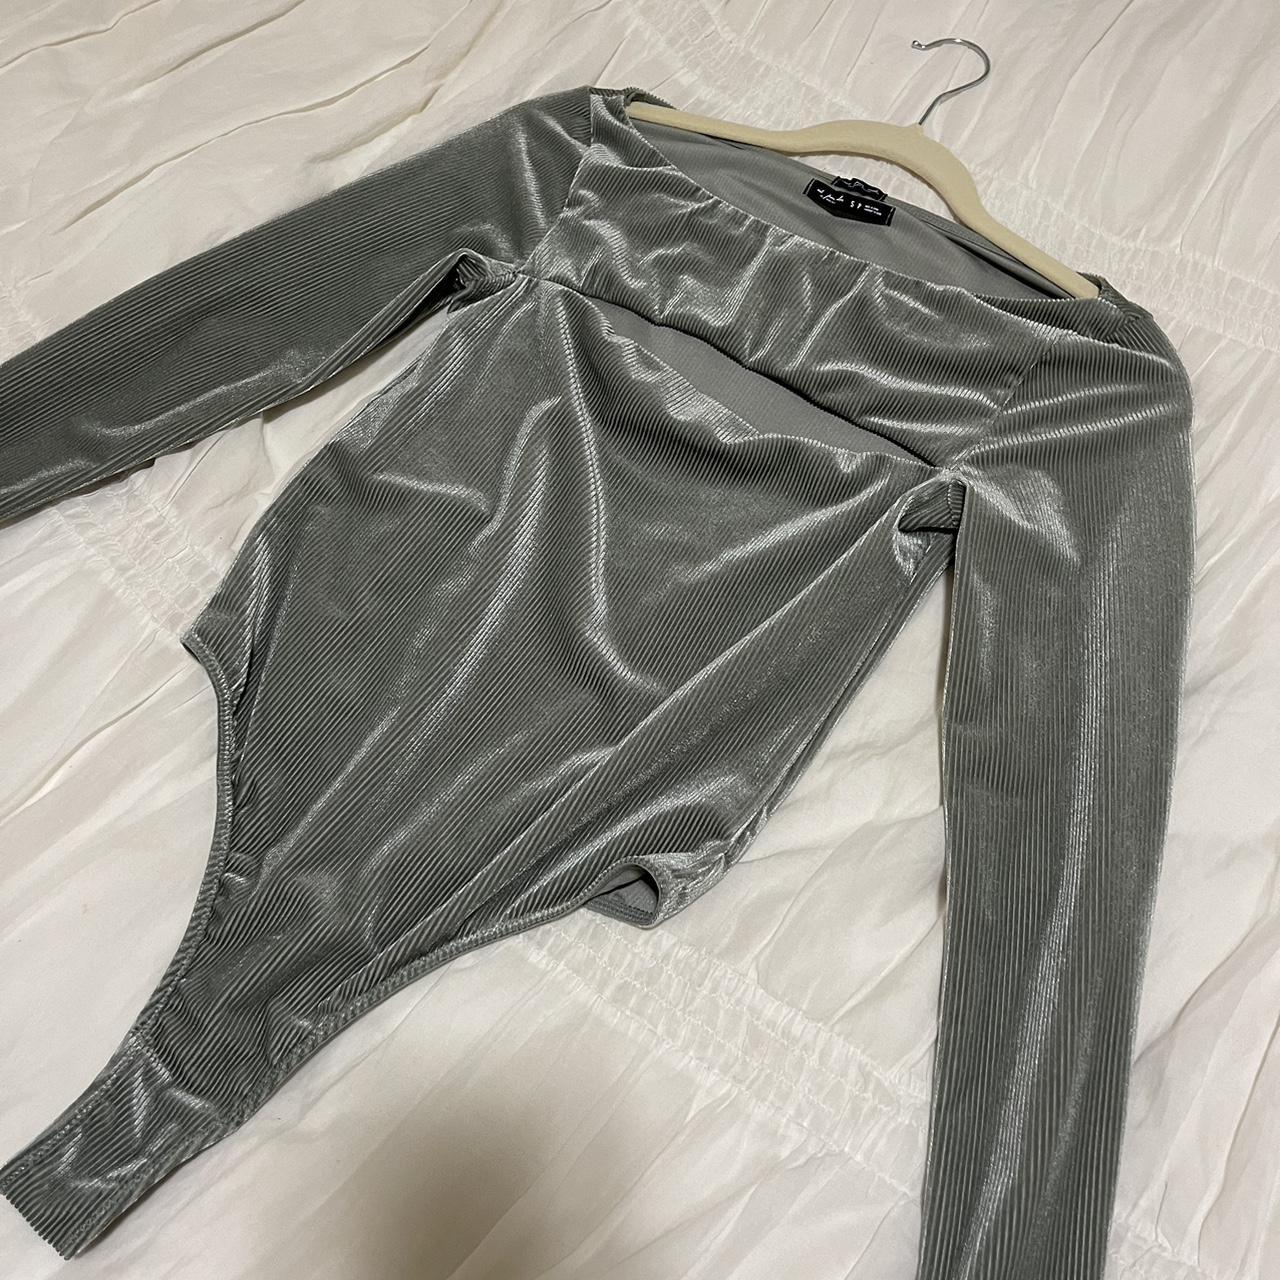 Urban Outfitters bodysuit - worn once (no cap) Size:... - Depop